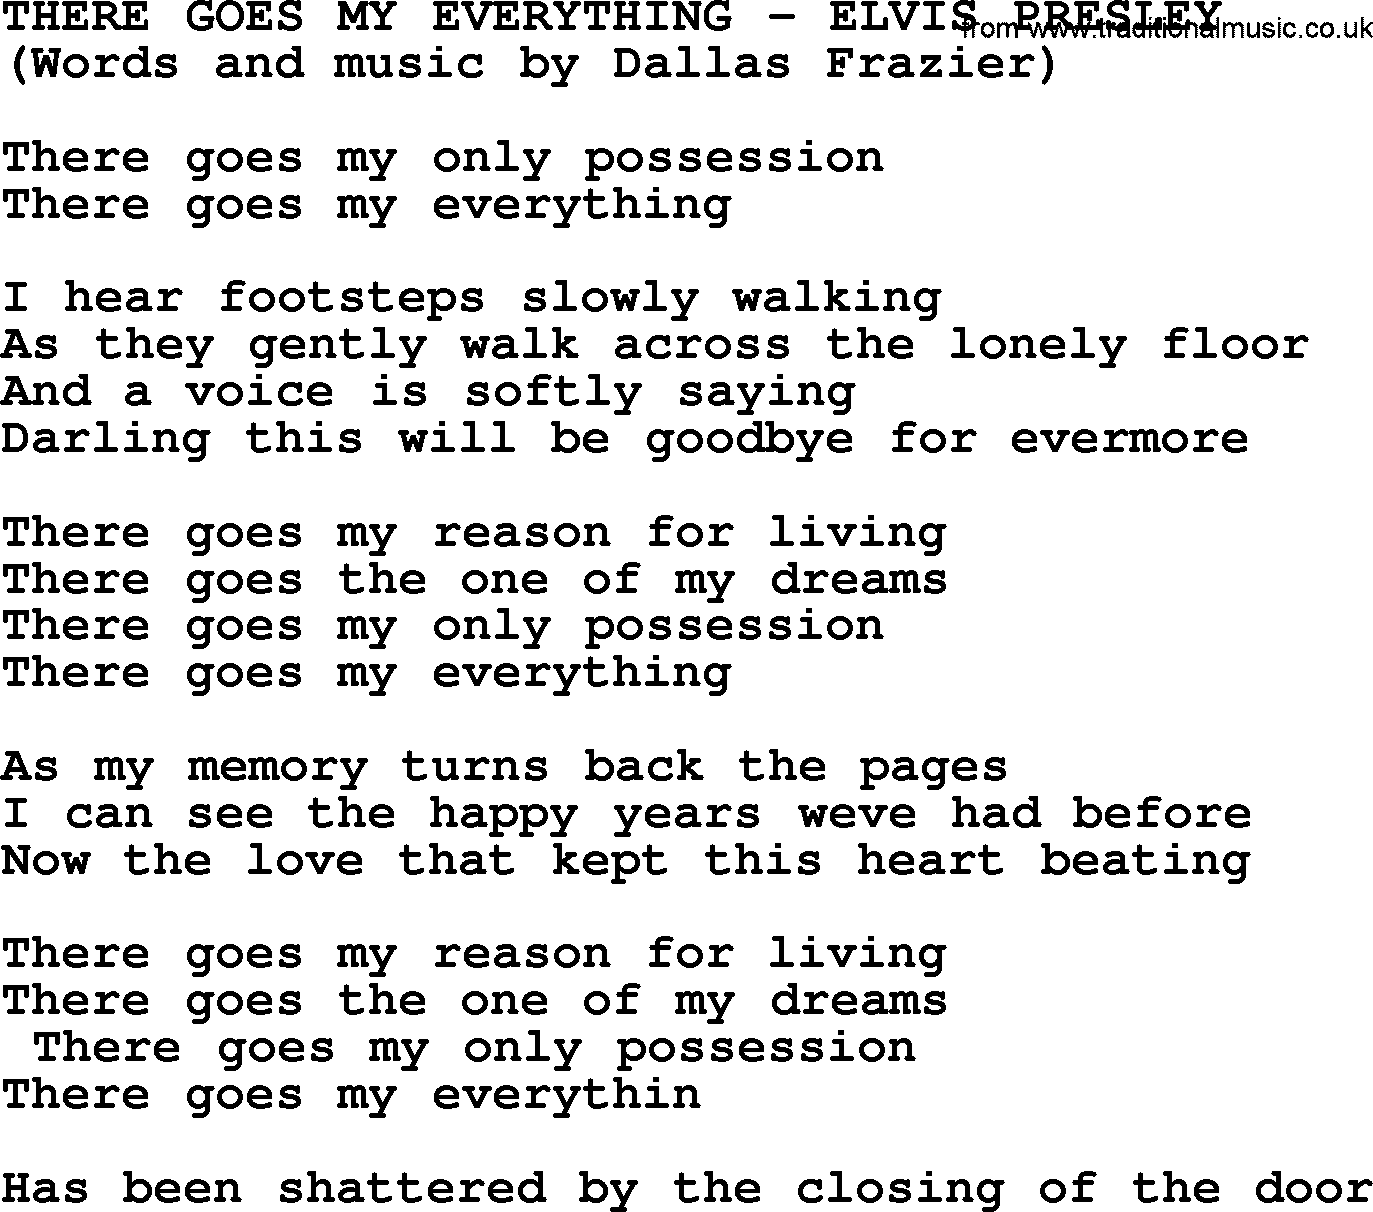 Elvis Presley song: There Goes My Everything lyrics